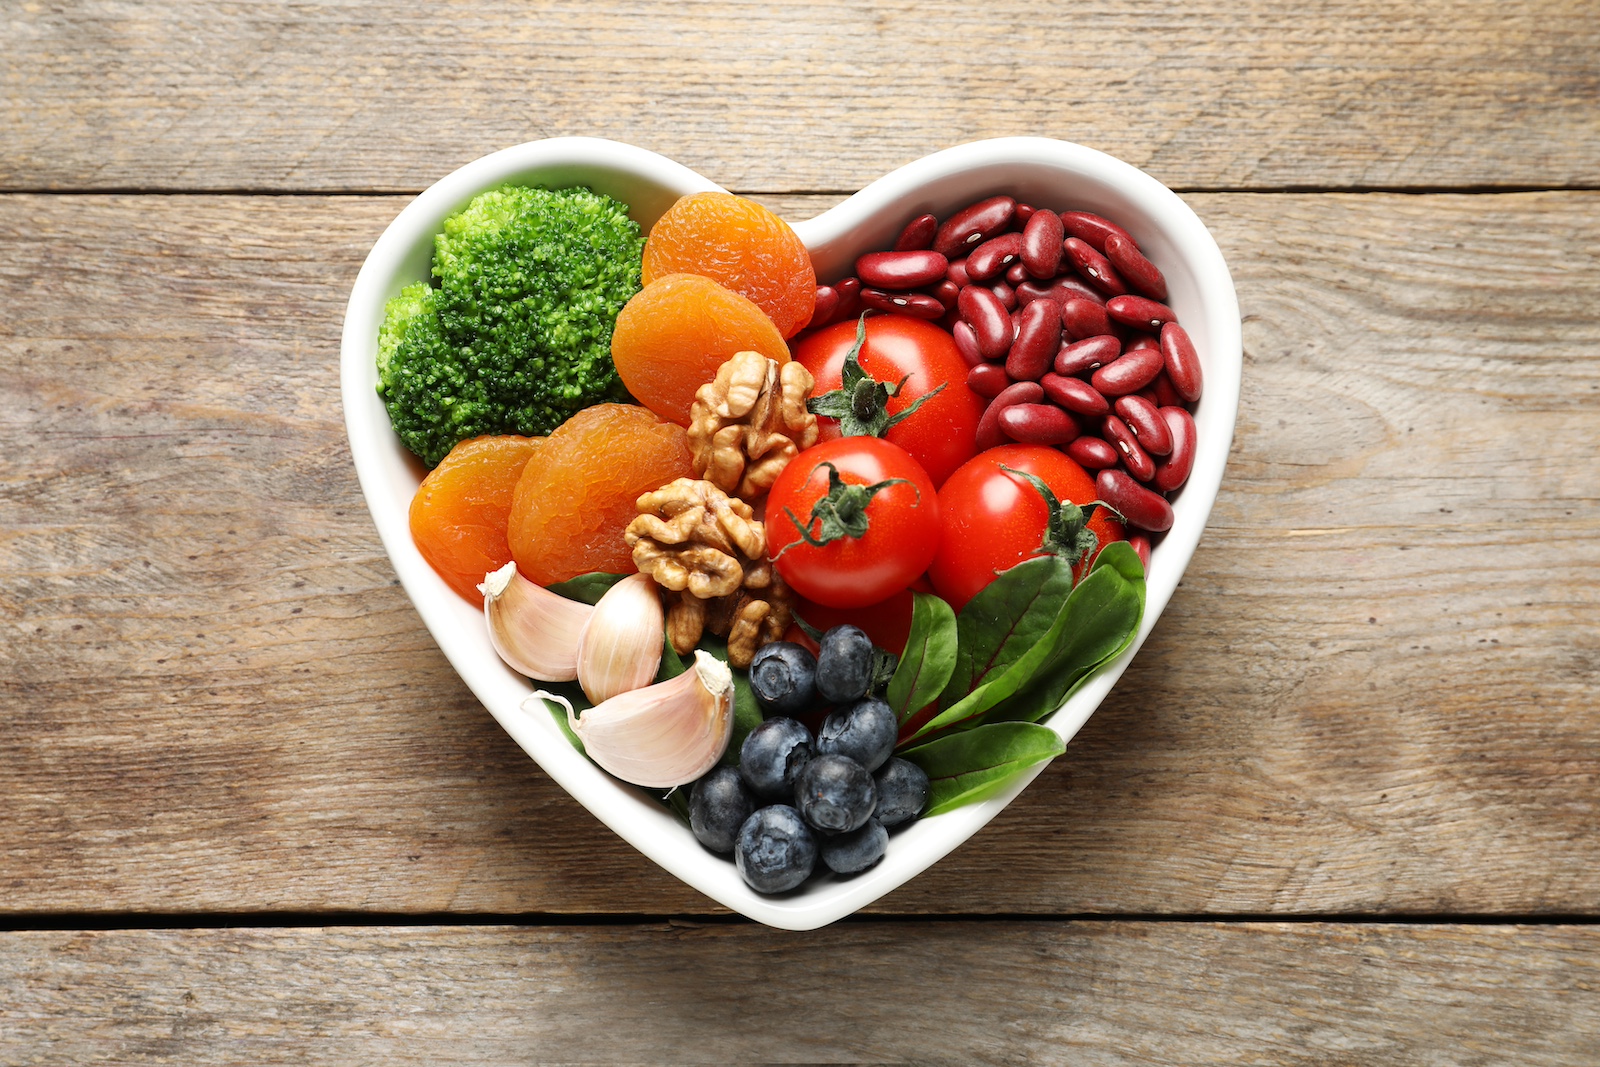 A heart-shaped bowl full of fruits and veggies